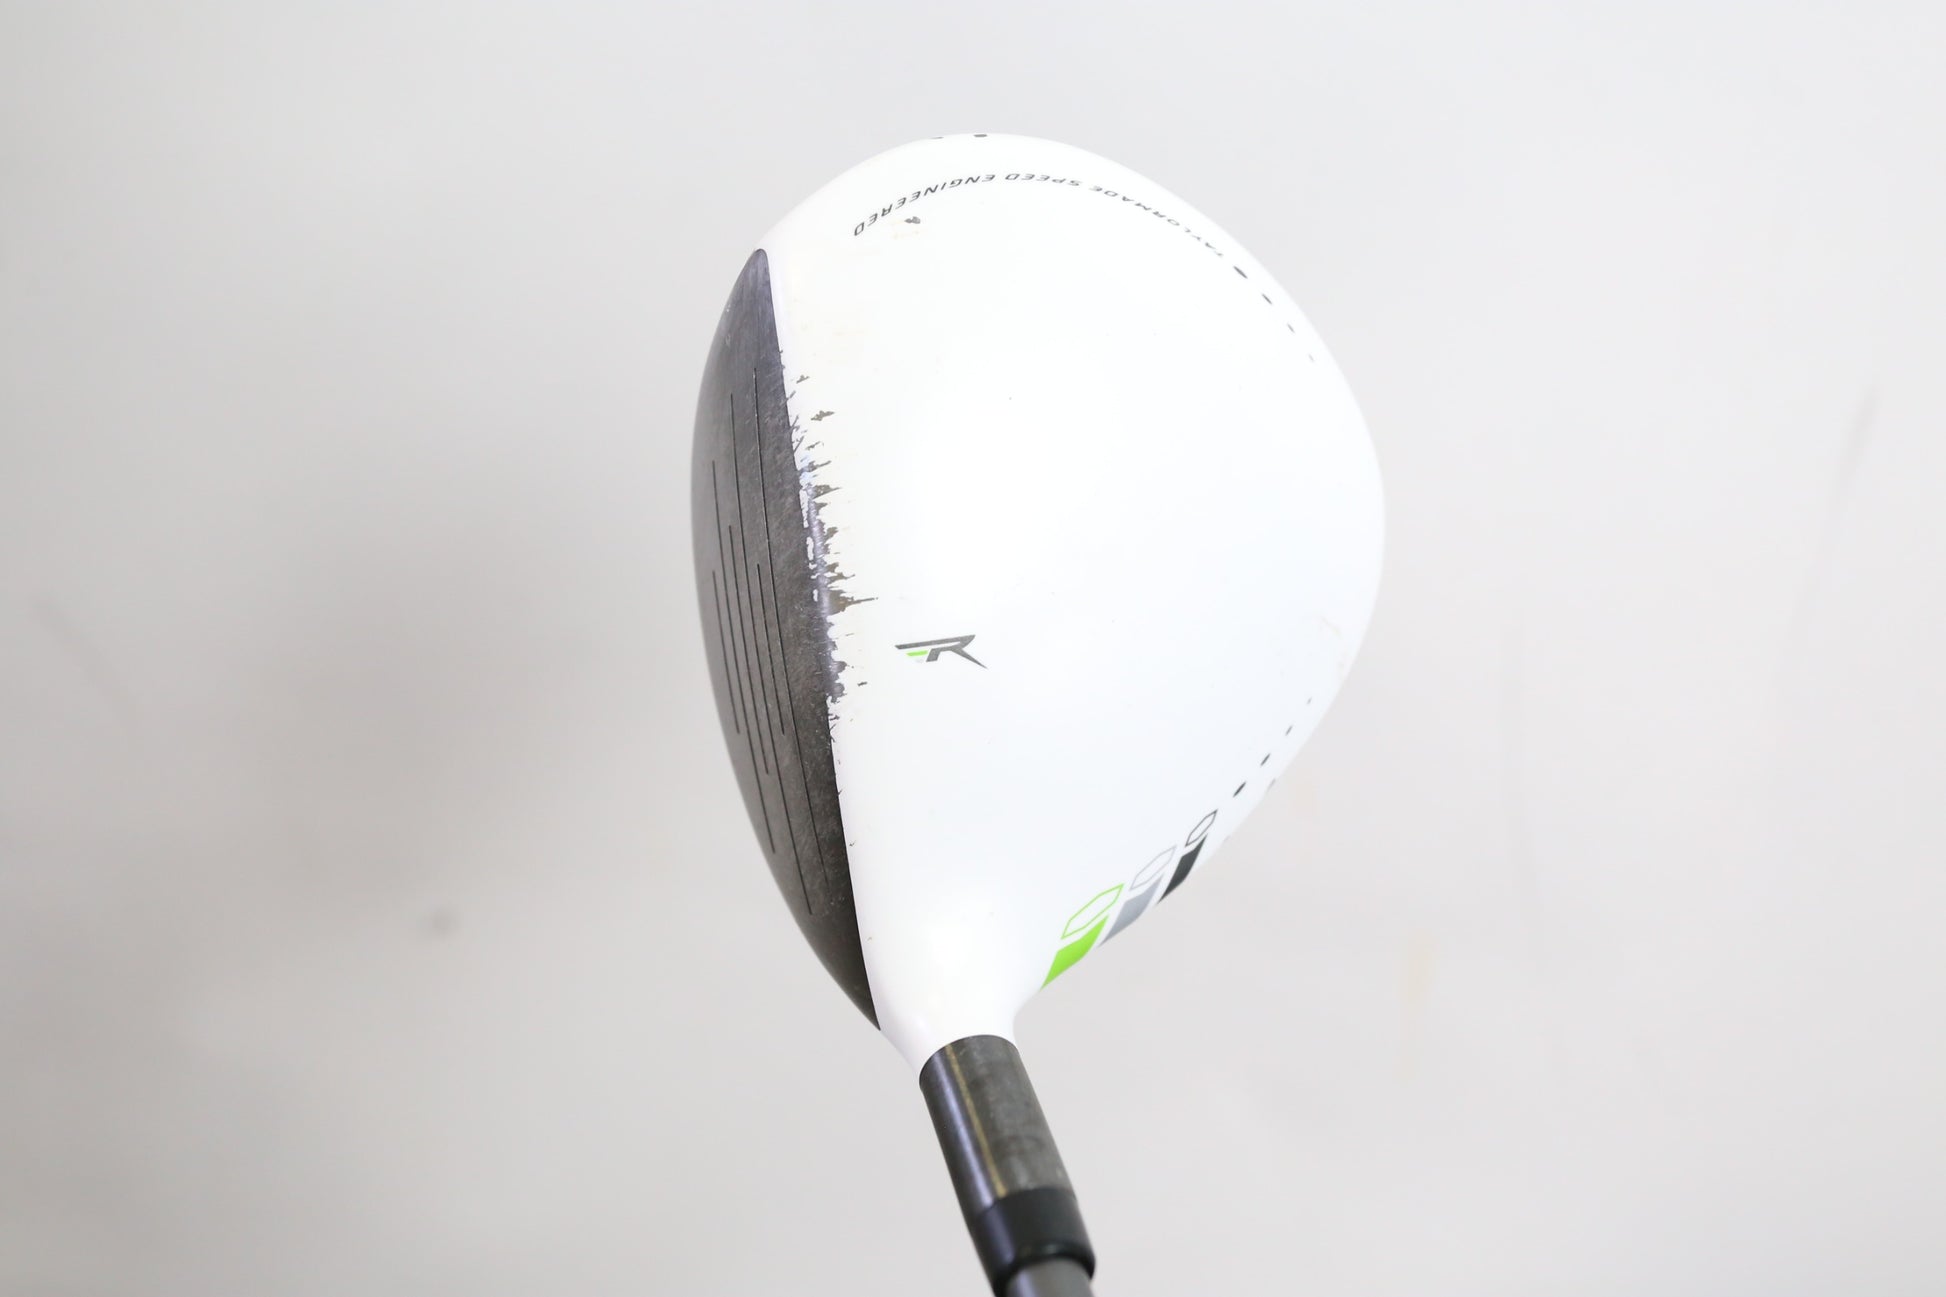 Used TaylorMade RocketBallz Tour 3-Wood - Right-Handed - 14.5 Degrees - Stiff Flex-Next Round